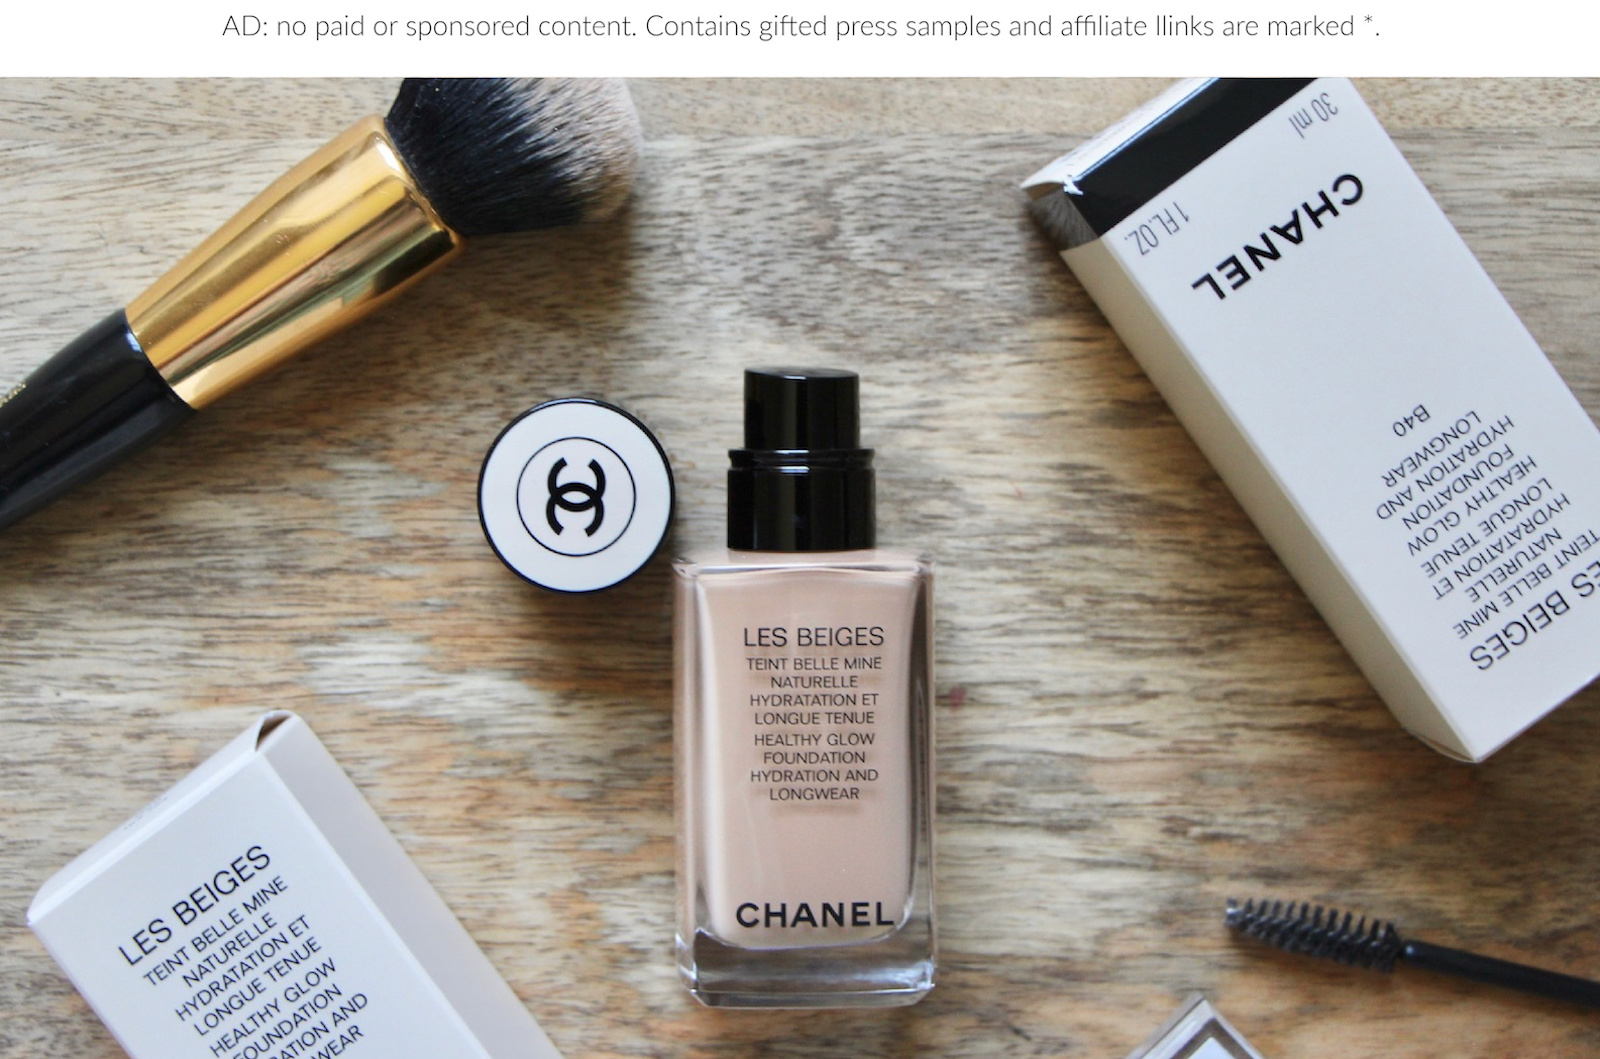 Foundation Review Chanel Les Beiges Healthy Glow Makeup  Ruth Crilly